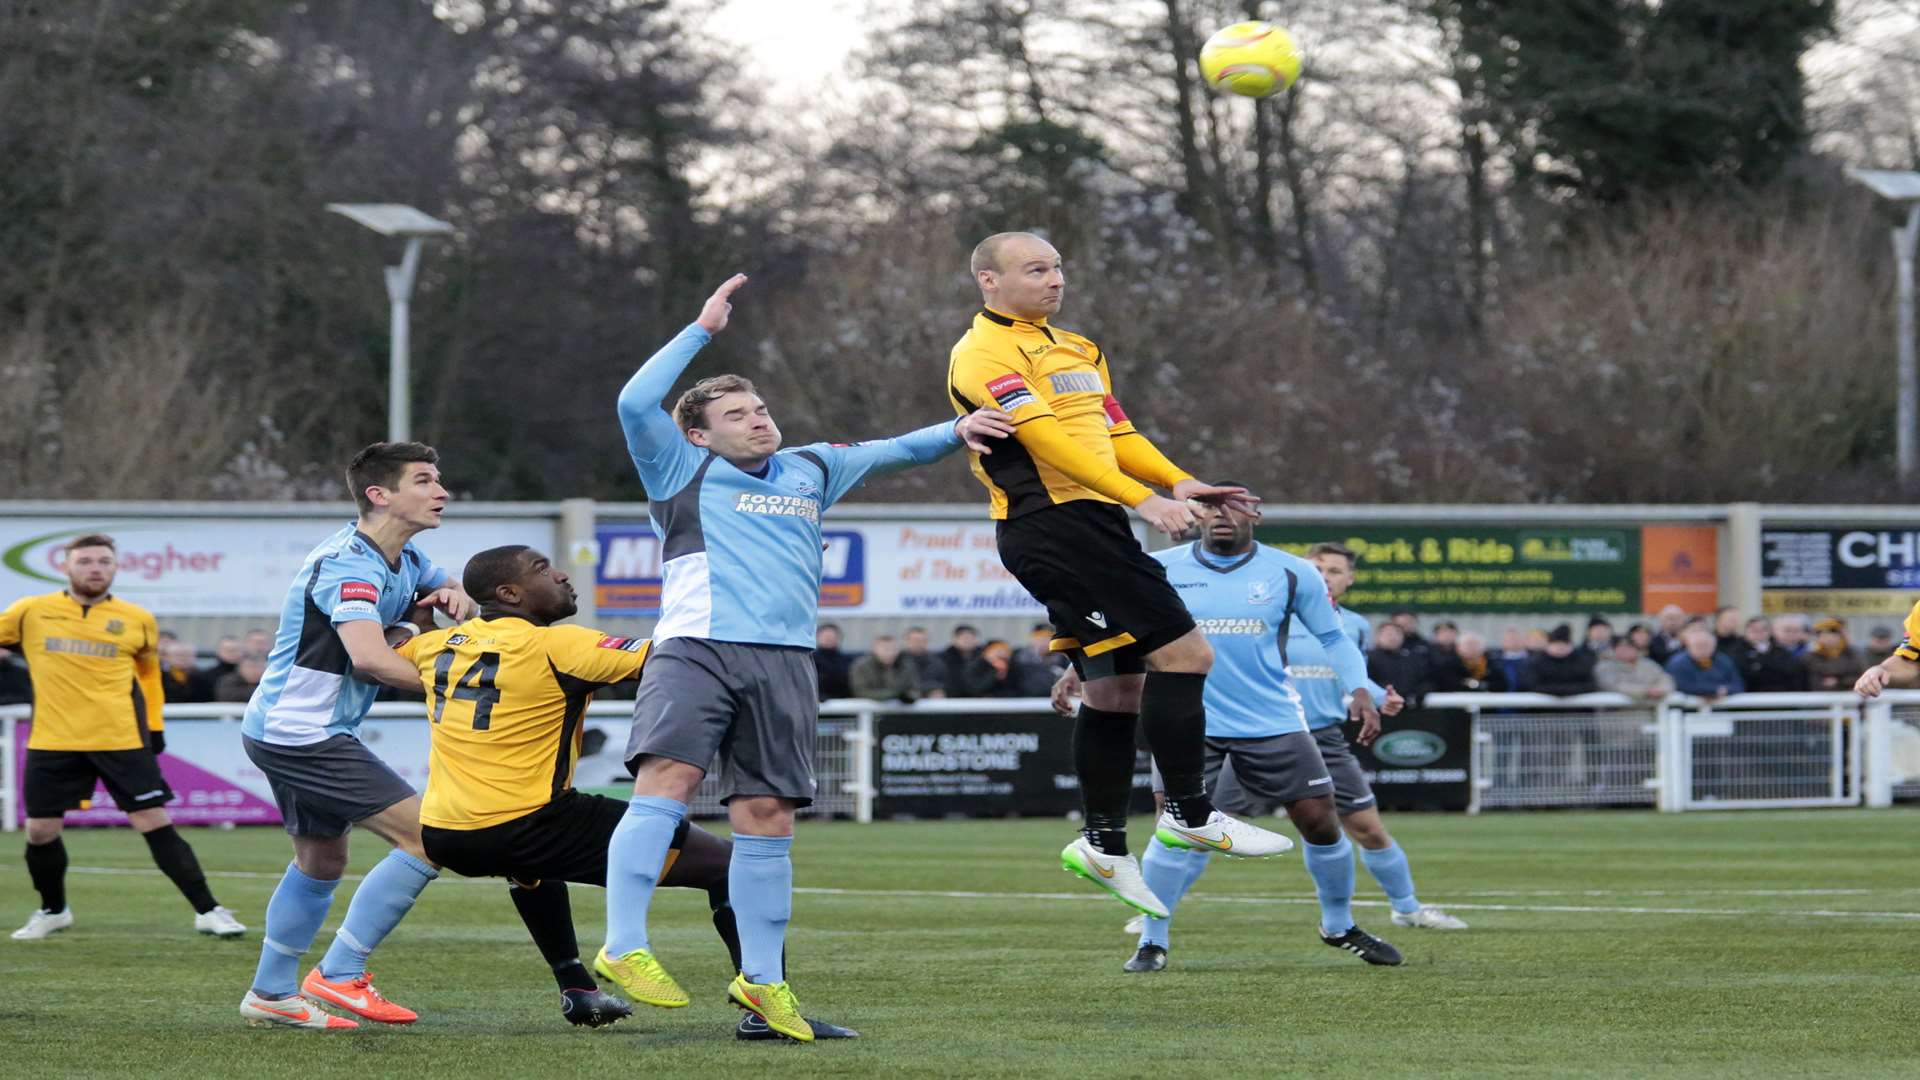 Steve Watt gets up to win this header against Enfield Picture: Martin Apps